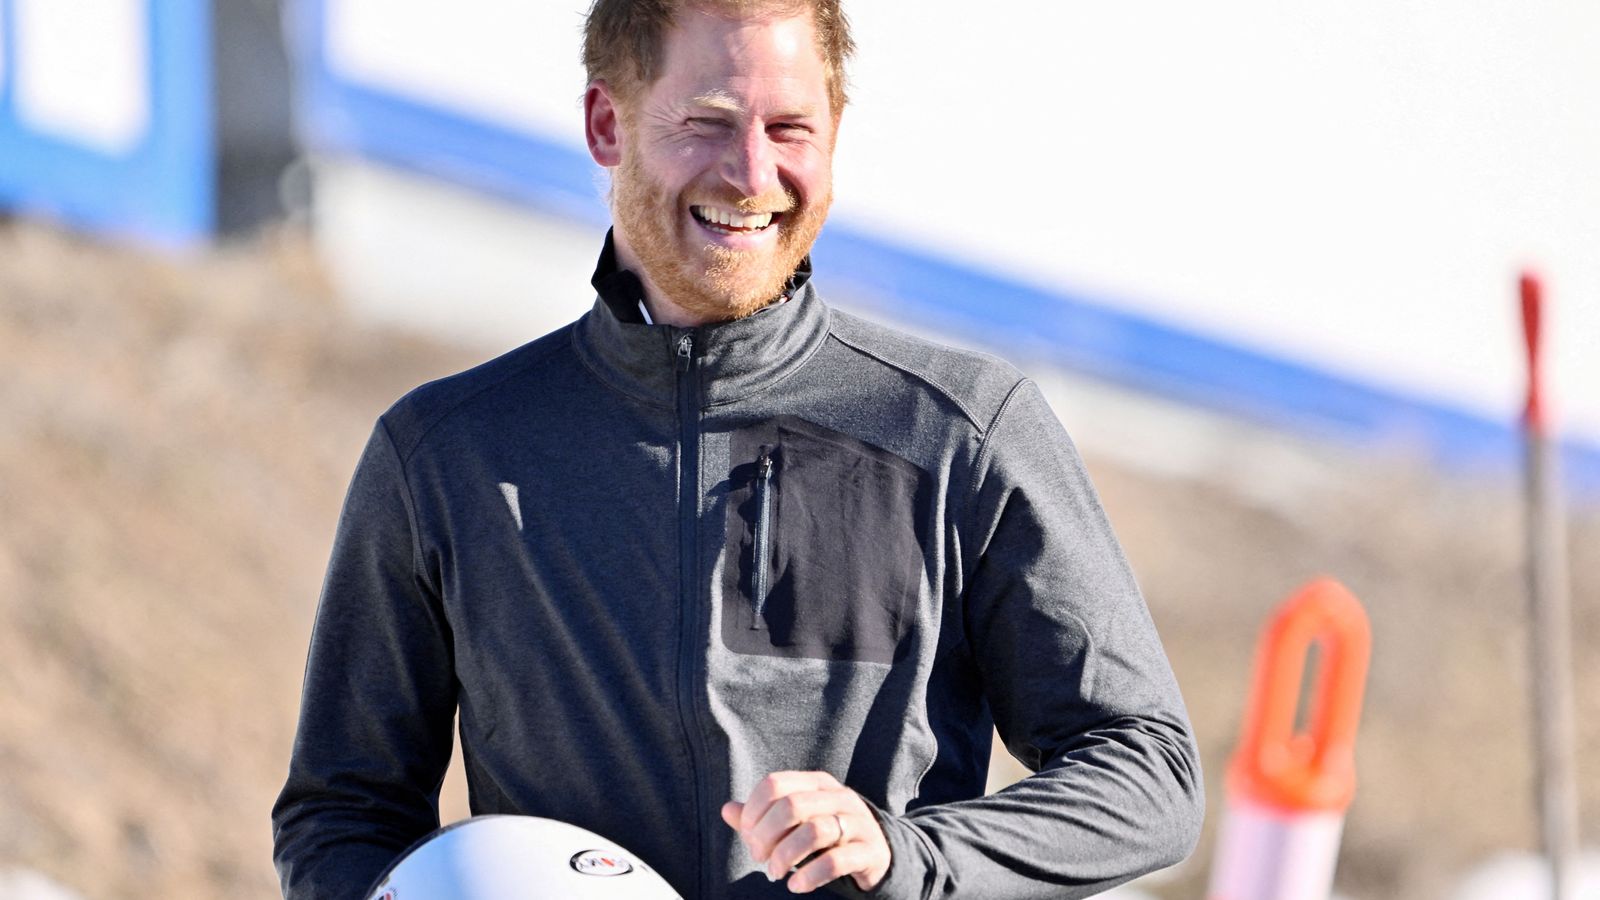 Prince Harry suggests his father's cancer diagnosis could lead to their reconciliation